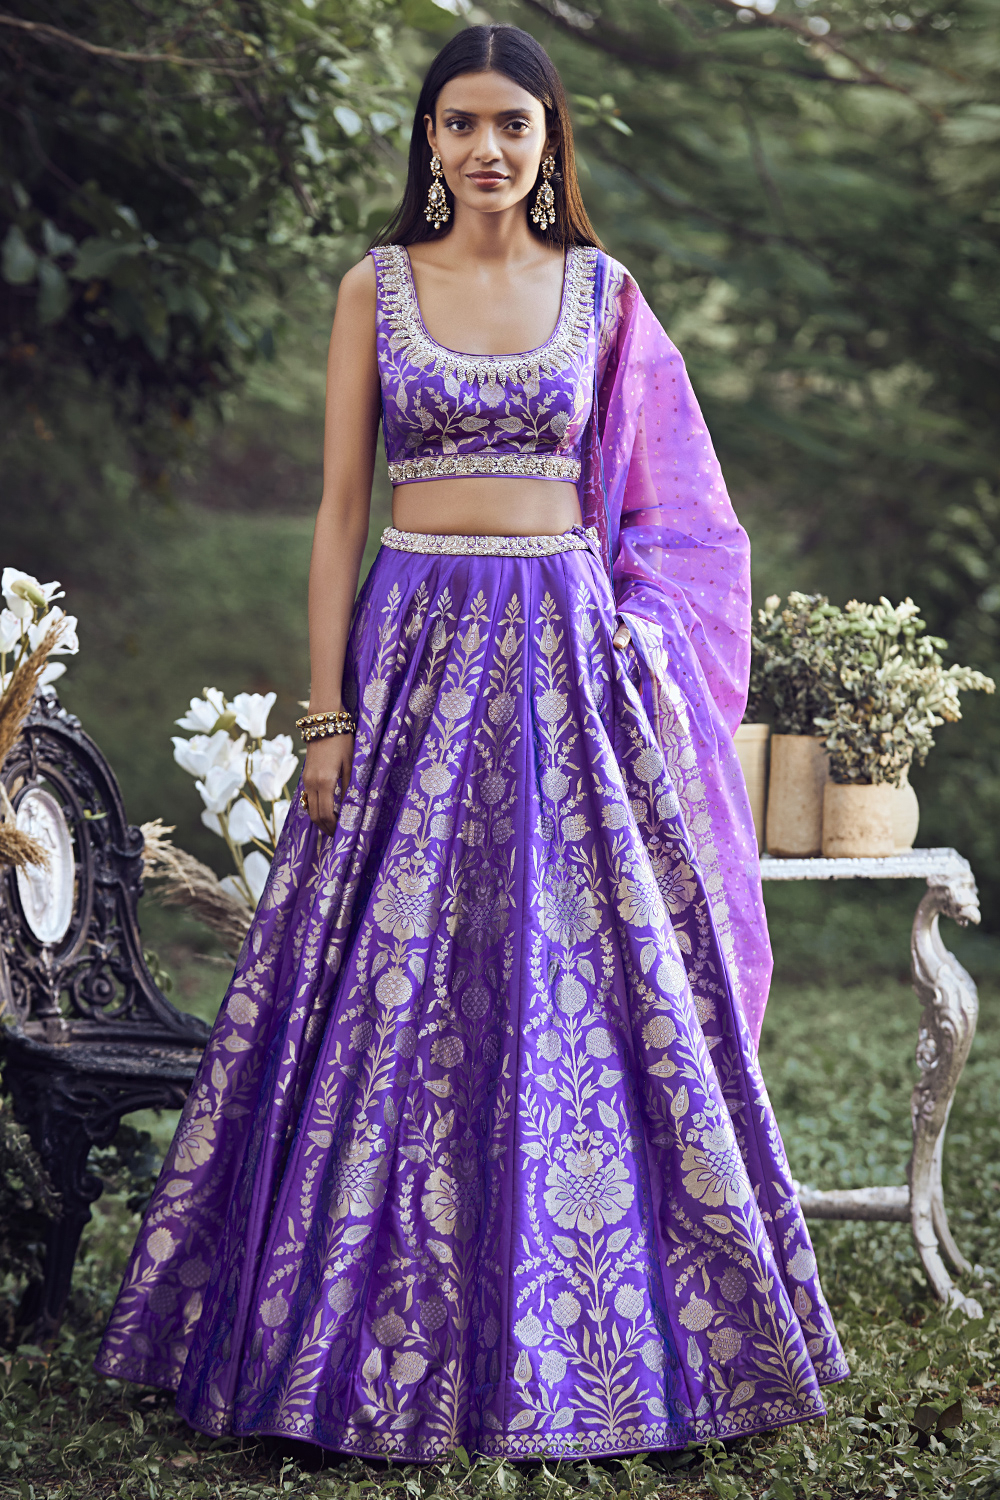 Which trendy colors of ethnic wear are in demand?